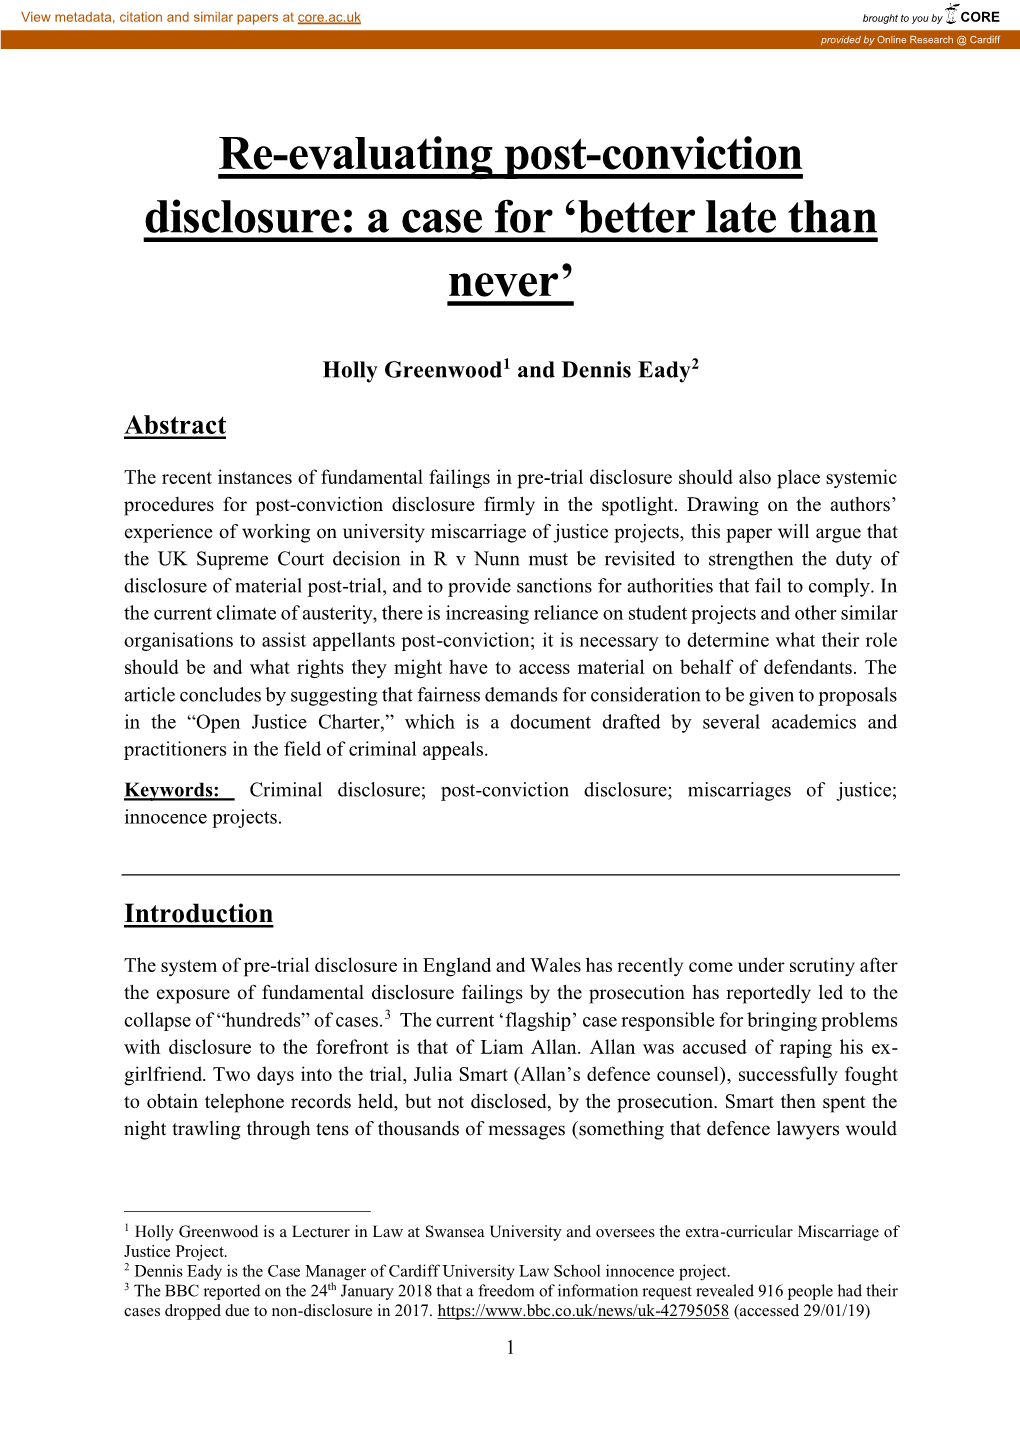 Re-Evaluating Post-Conviction Disclosure: a Case for ‘Better Late Than Never’